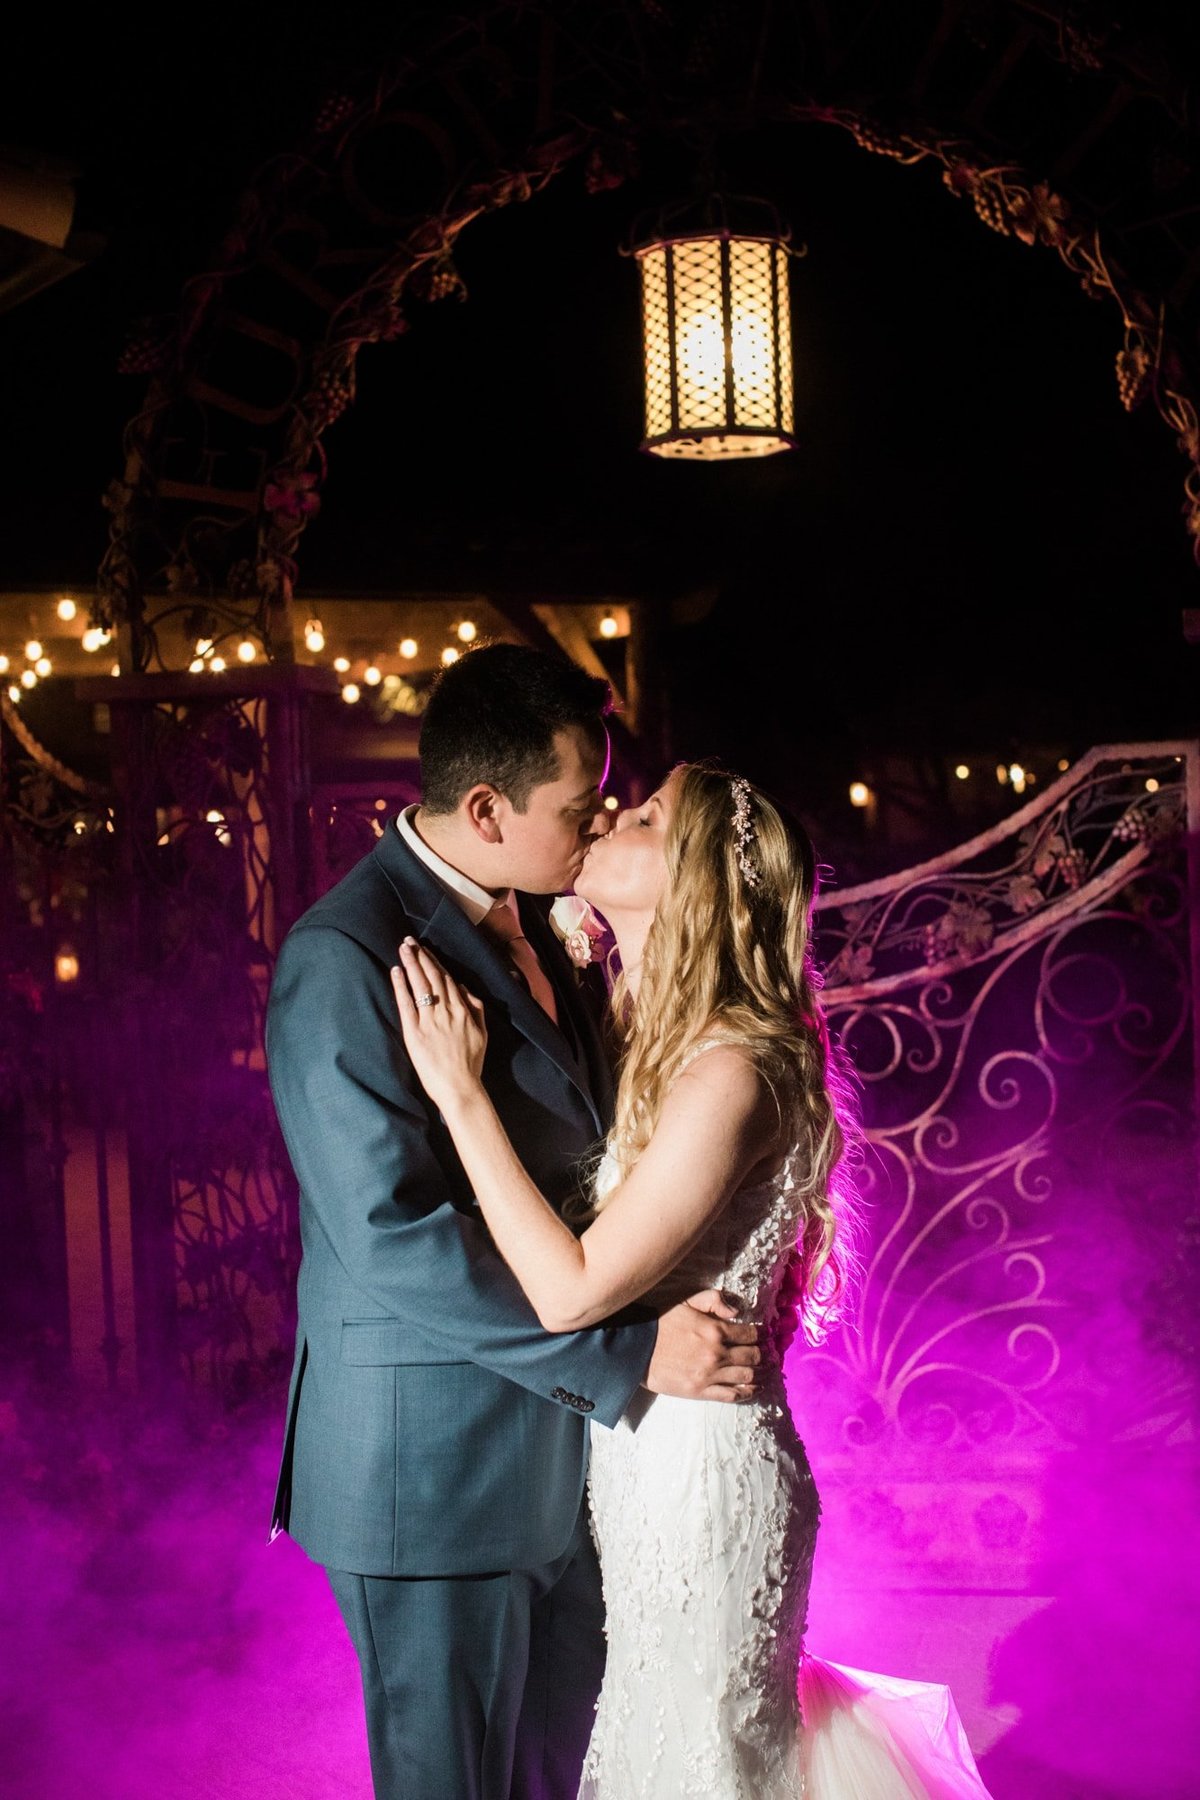 Bride and Groom share a kiss as a purple haze appears in the background